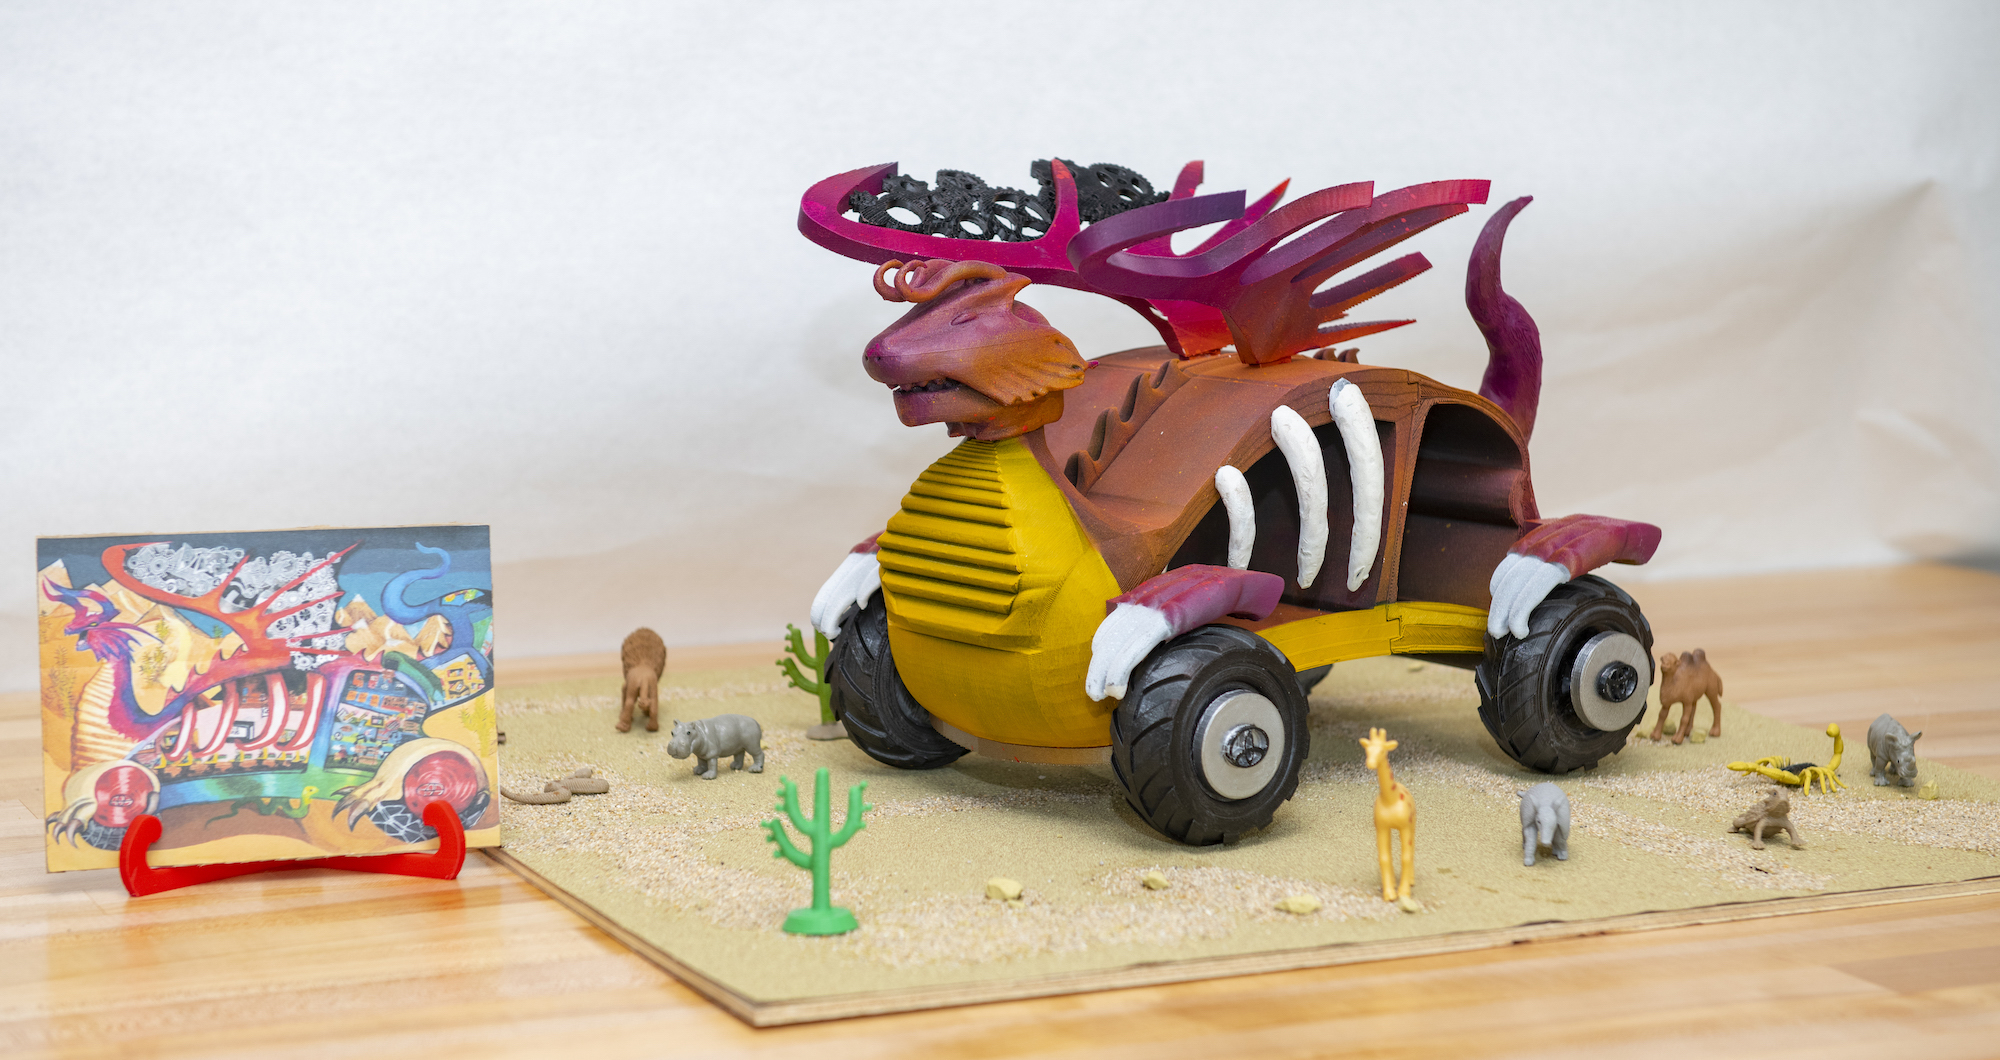 A 3D-printed model of a dragon car on a desert landscape. Next to it is the child's drawing that inspired it.